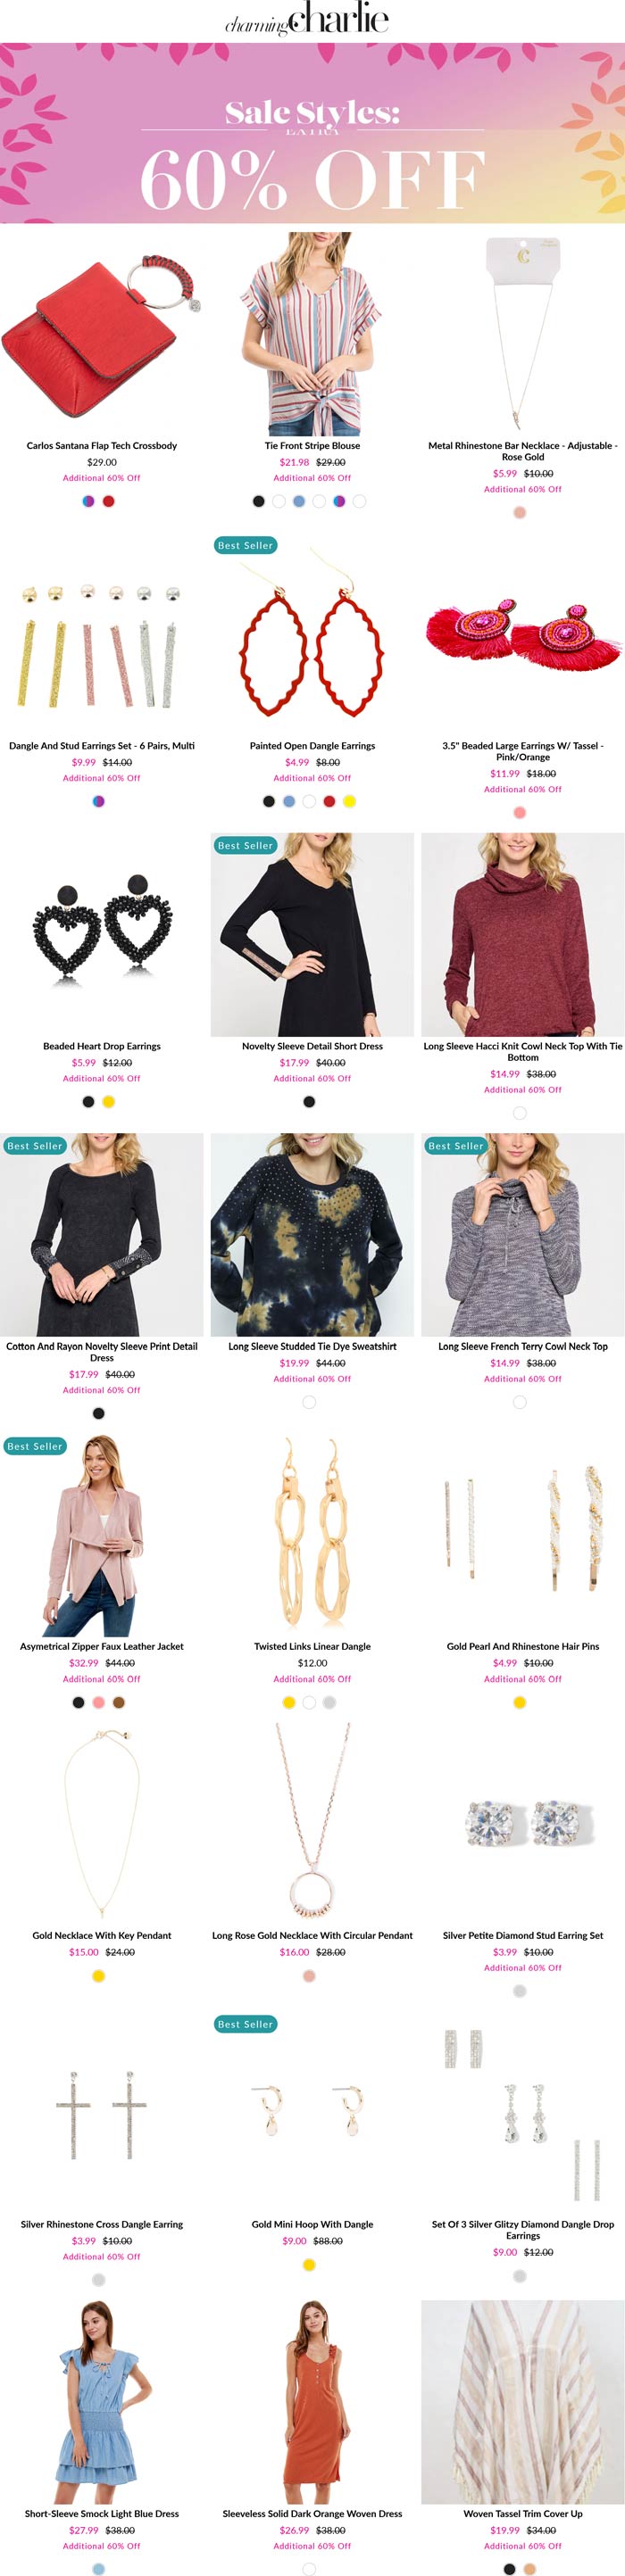 Charming Charlie stores Coupon  Extra 60% off sale items at Charming Charlie #charmingcharlie 